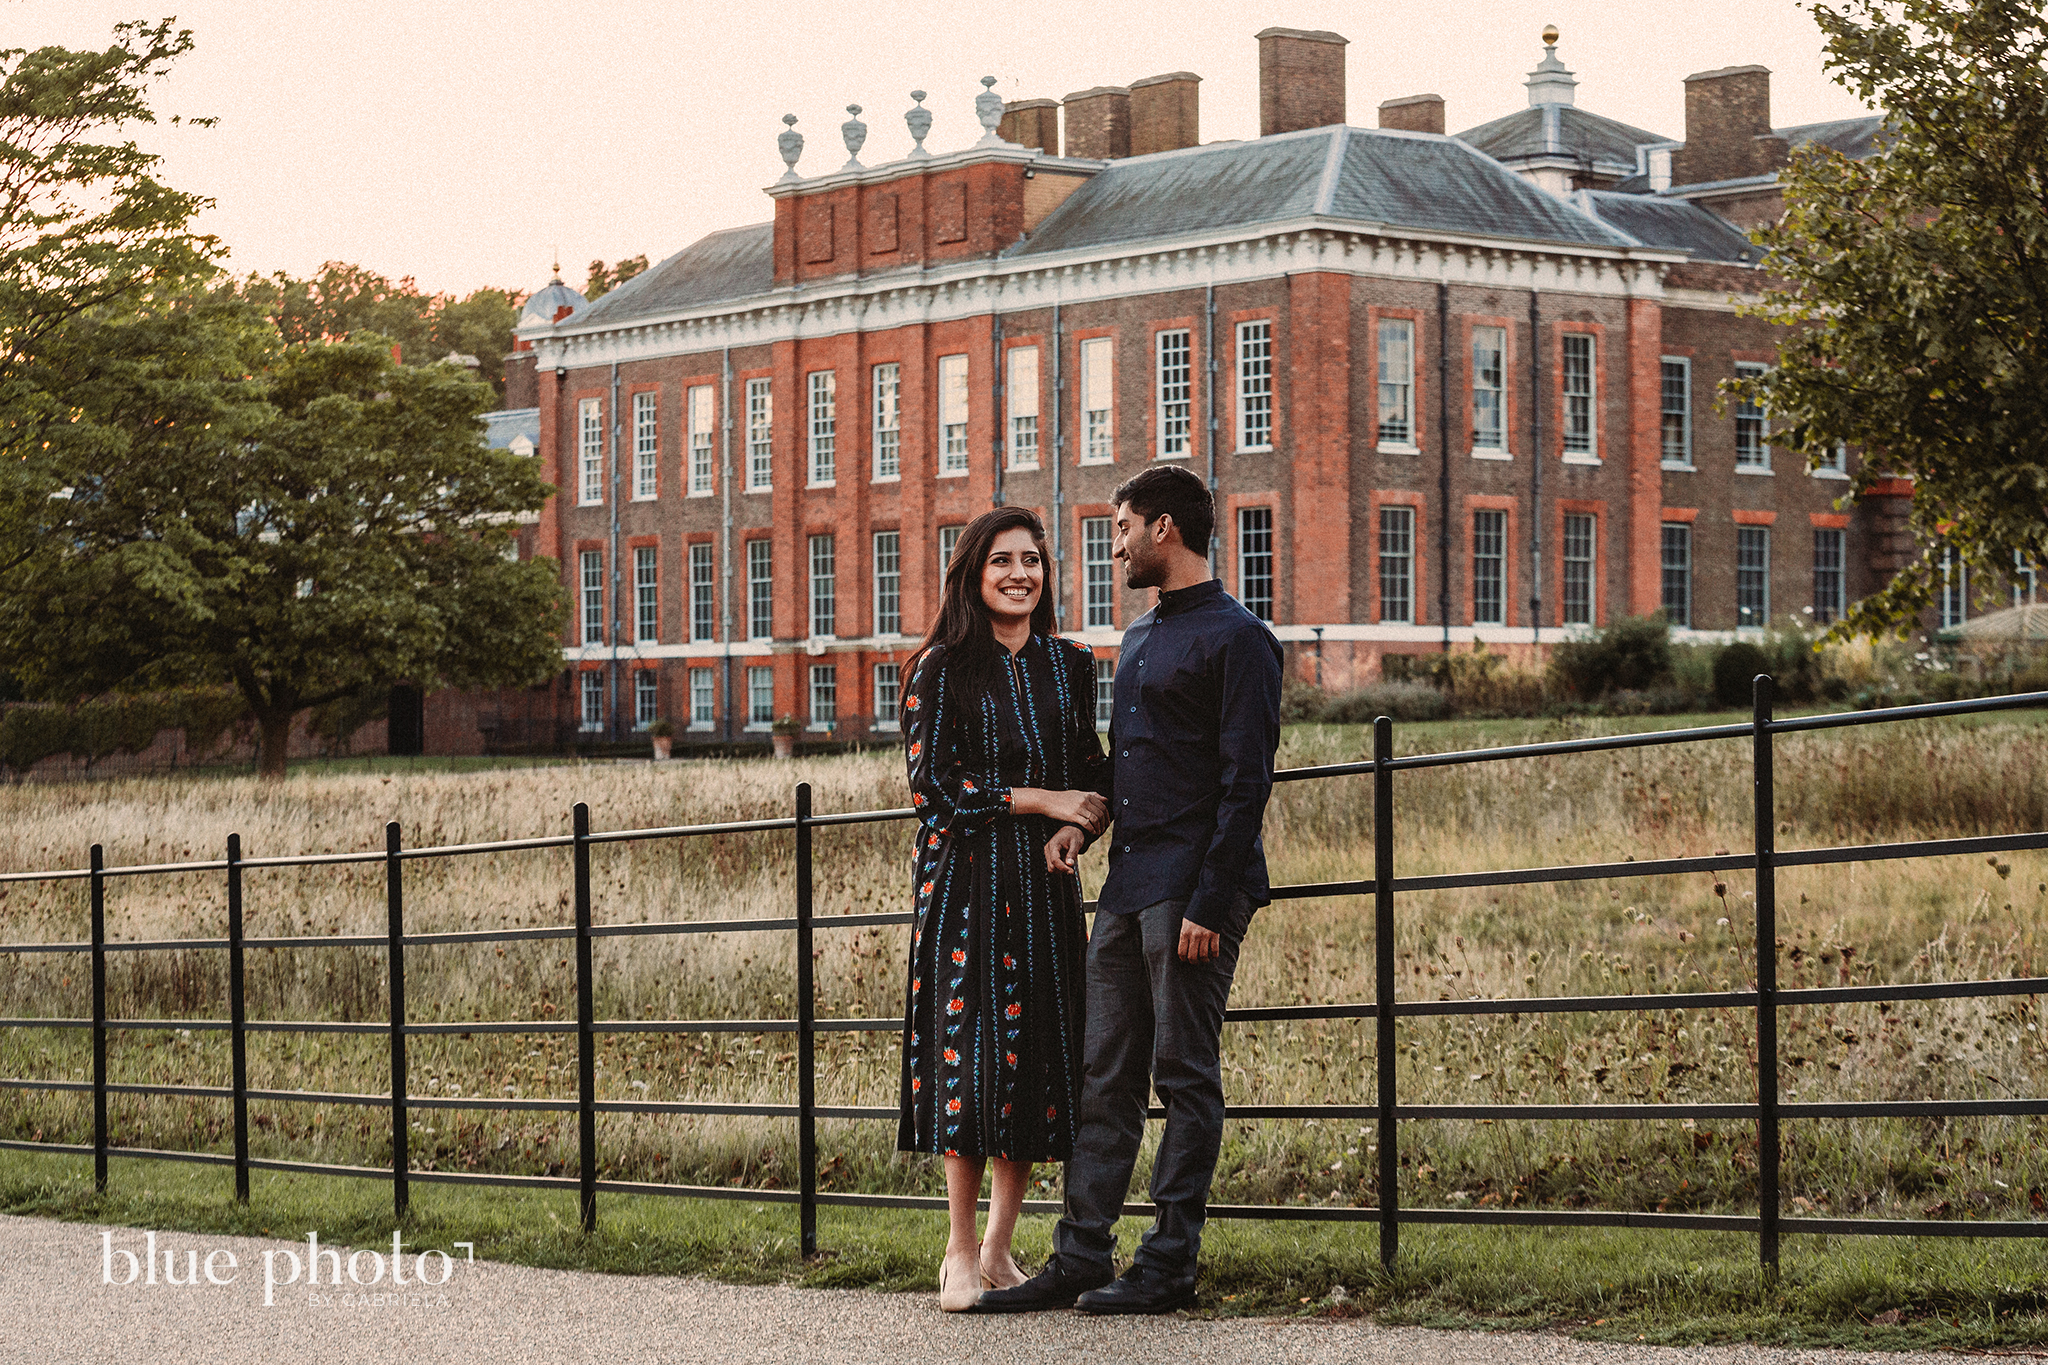 Engagement session in Kensingtom Gardens, Central London. A couple is looking at each other and smilling.  